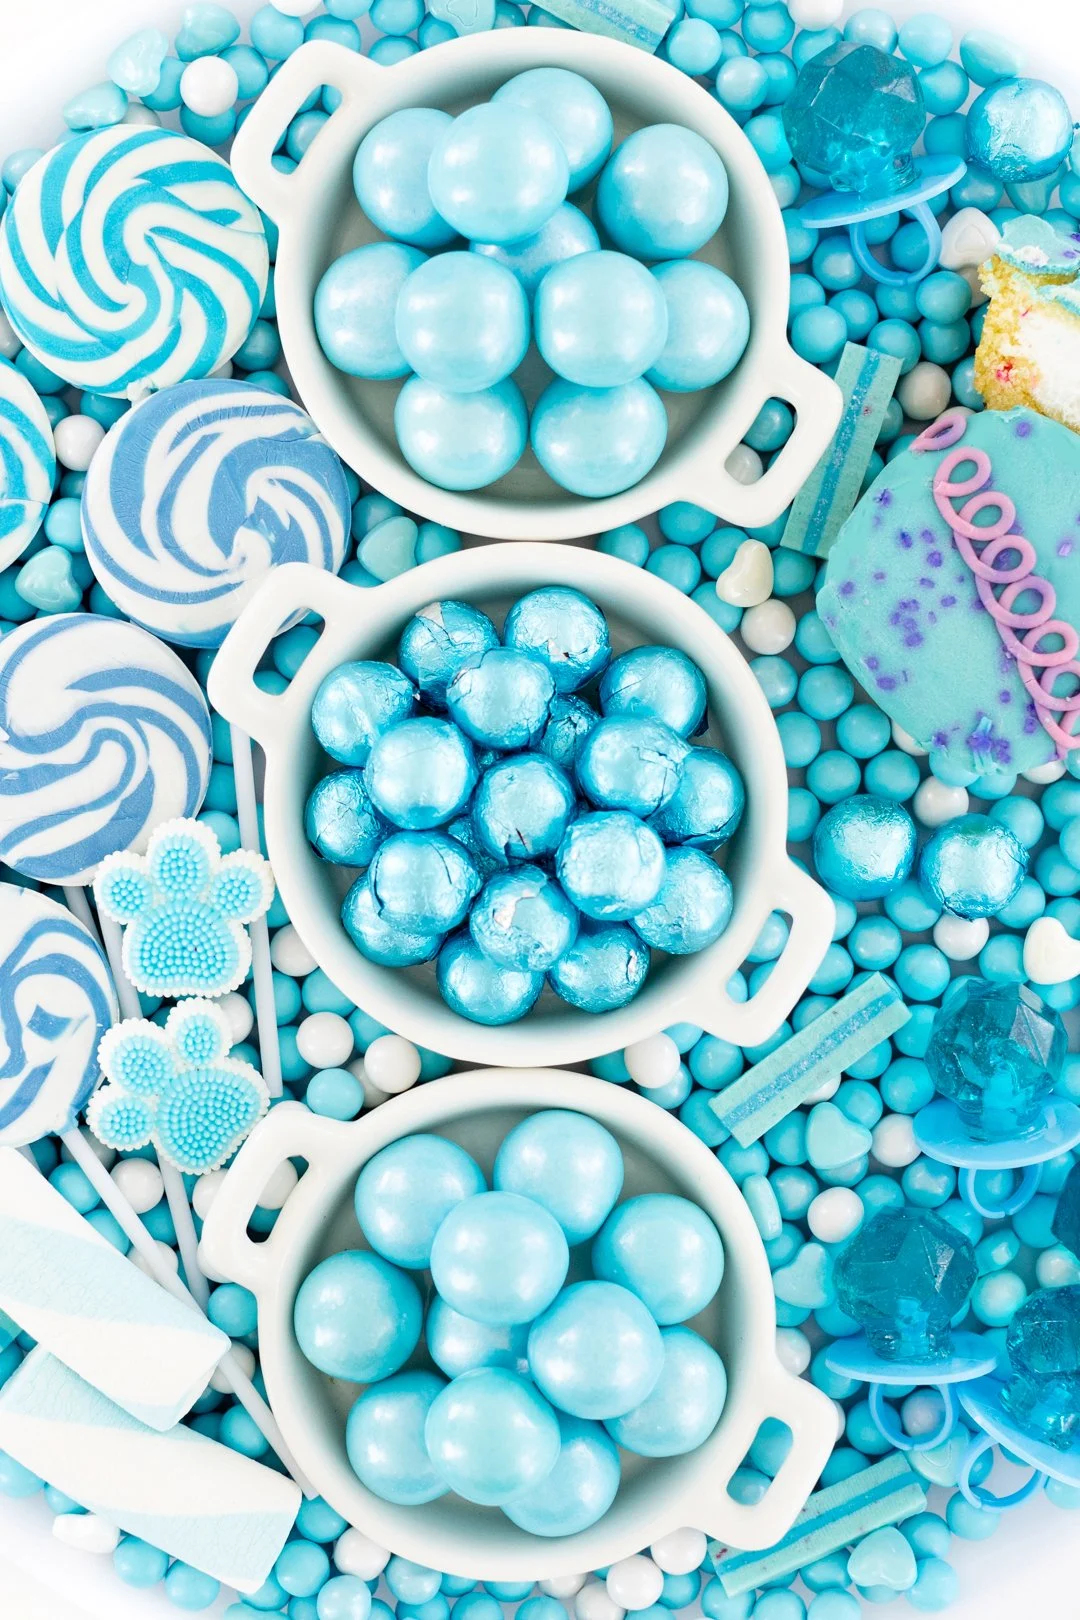 candies. Blue foil wrapped chocolates, gumballs, lollipops on a tray.